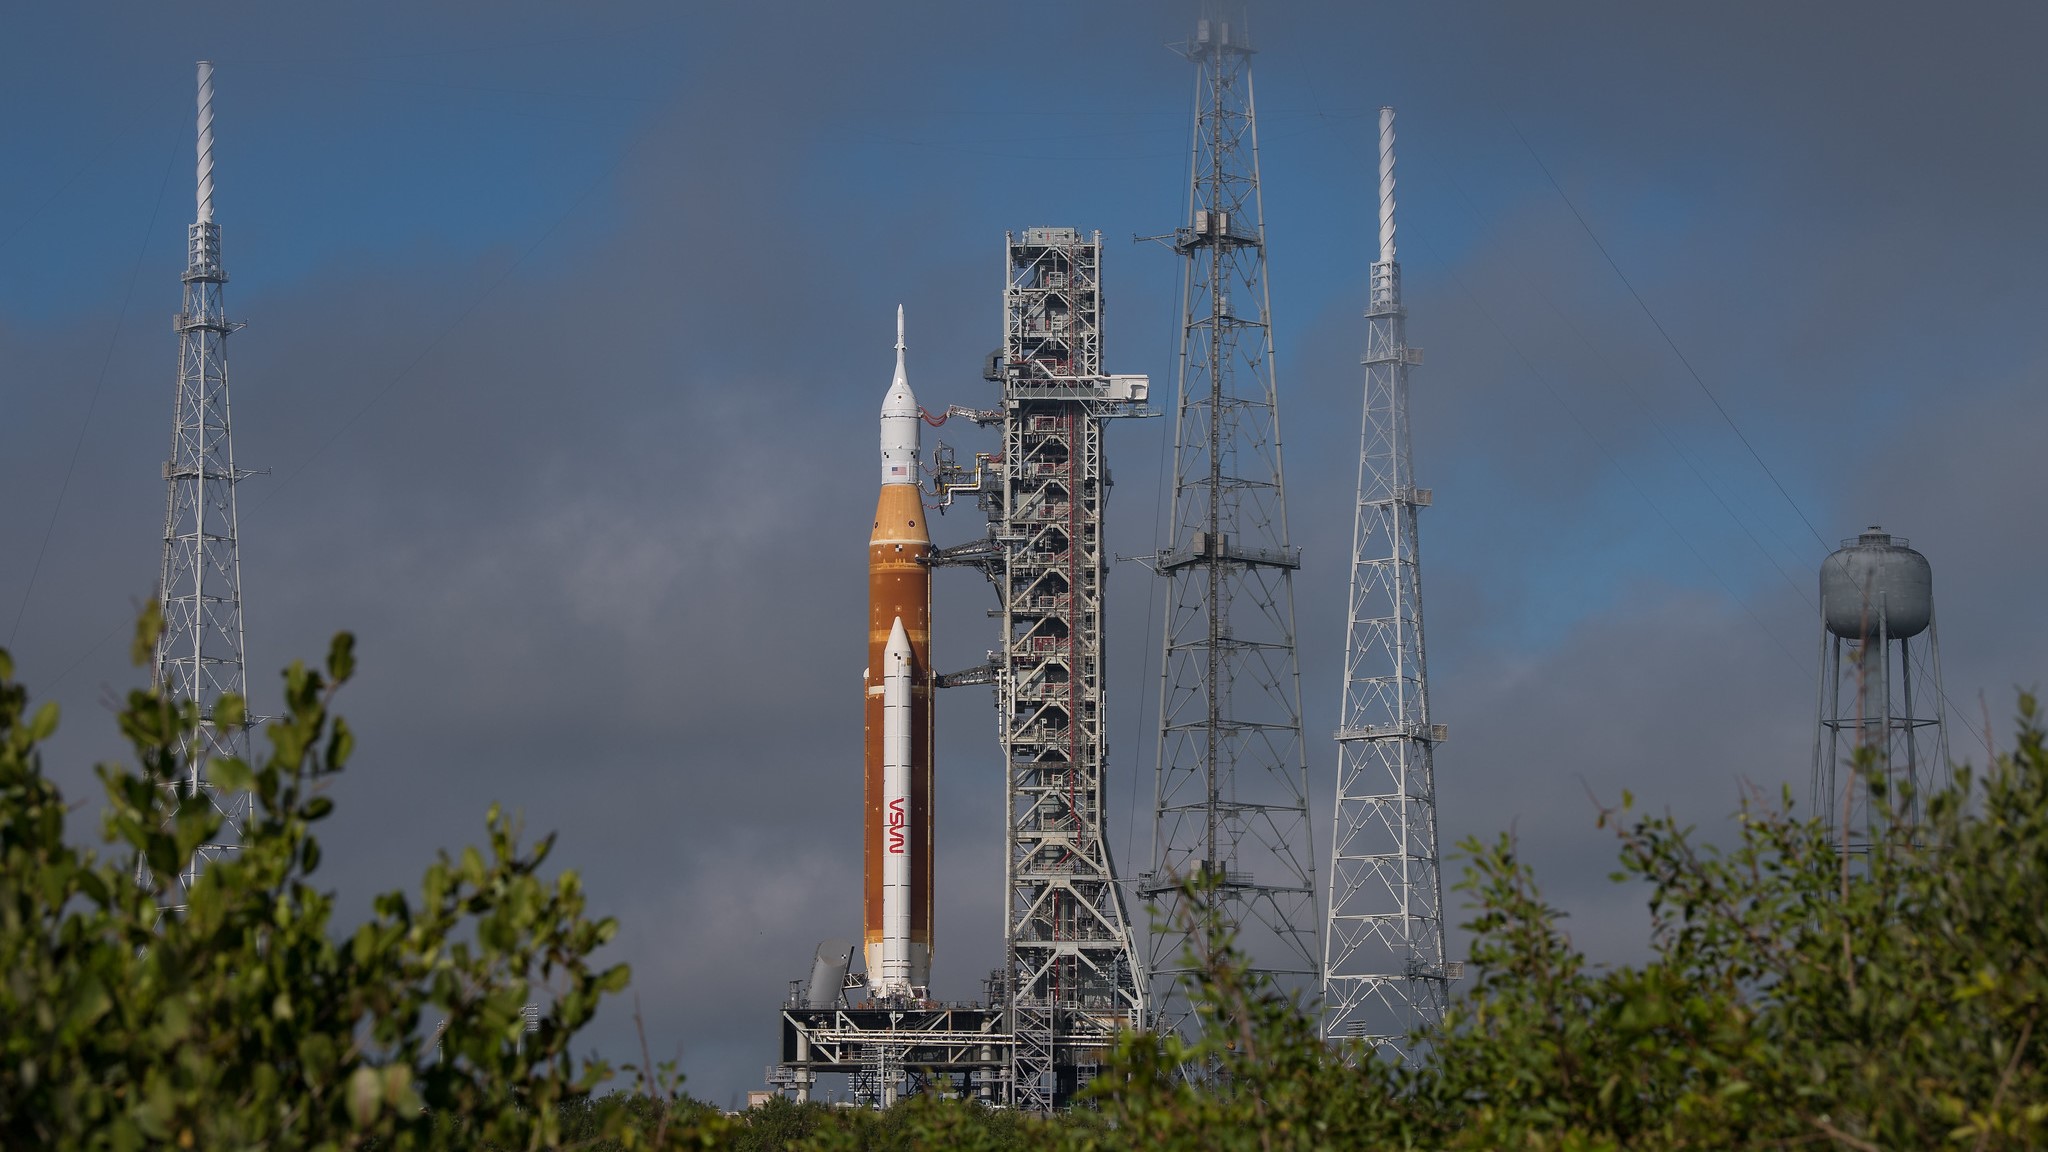 The Artemis 1 test flight will demonstrate that the Orion spacecraft can ferry humans to the moon and back.